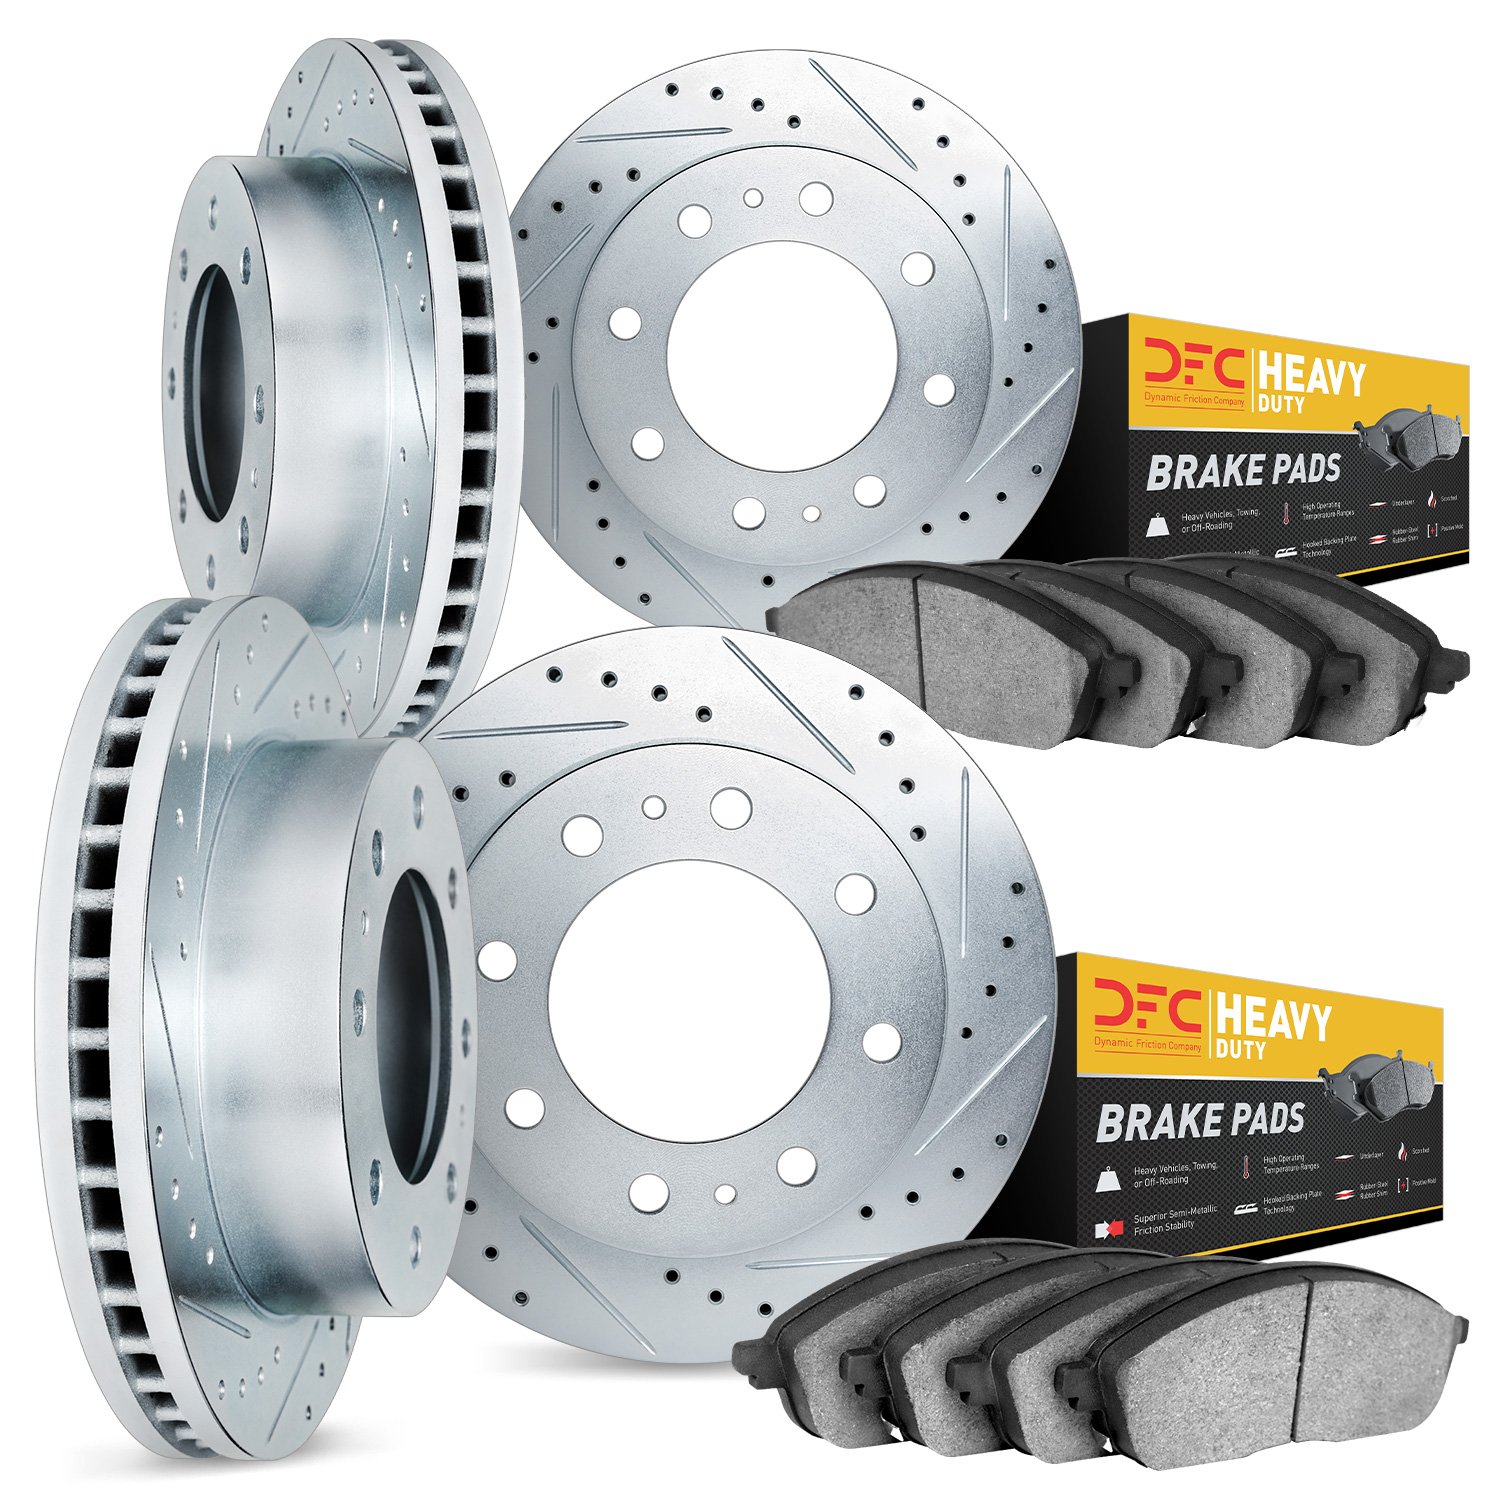 7204-99113 Drilled/Slotted Rotors w/Heavy-Duty Brake Pads Kit [Silver], Fits Select Ford/Lincoln/Mercury/Mazda, Position: Front